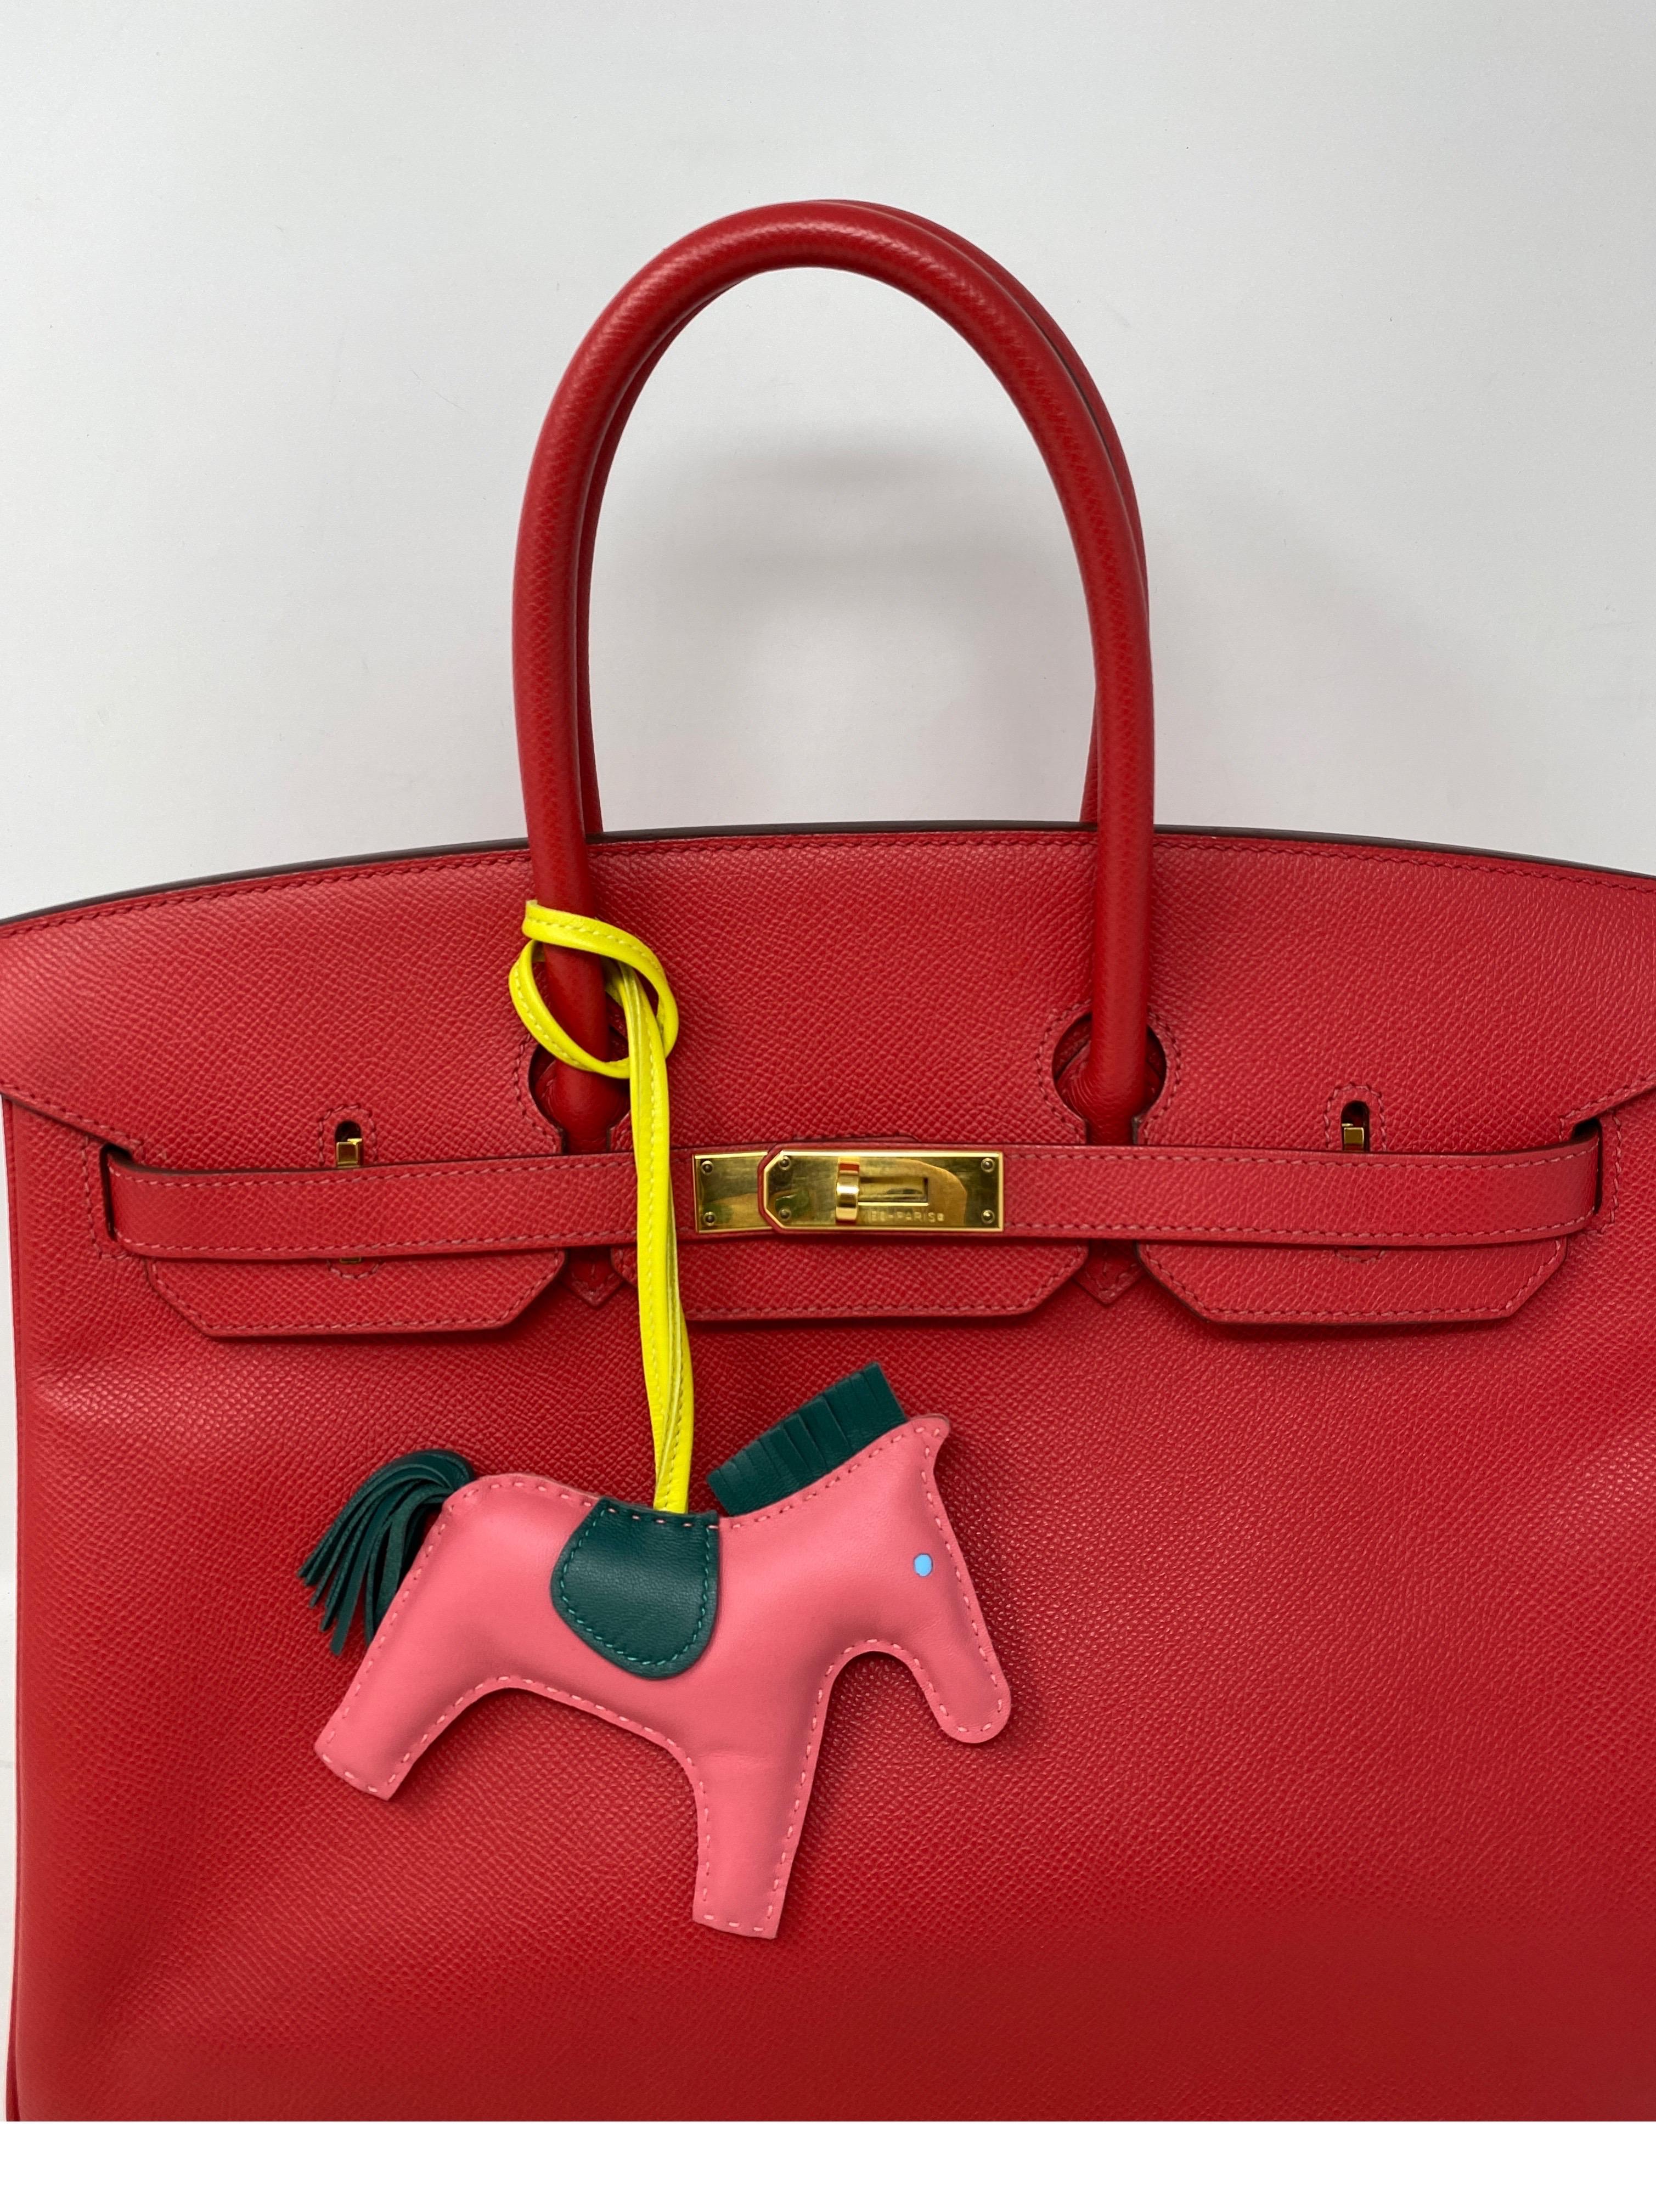 Hermes Birkin 35 Bougainvillea Pink Bag. Pink/ red/ color. Epsom leather. N stamp. Good condition. Does not come with clochette, lock and keys. Horse charm will be included. Rodeo charm in excellent condition. Gold hardware. Guaranteed authentic. 